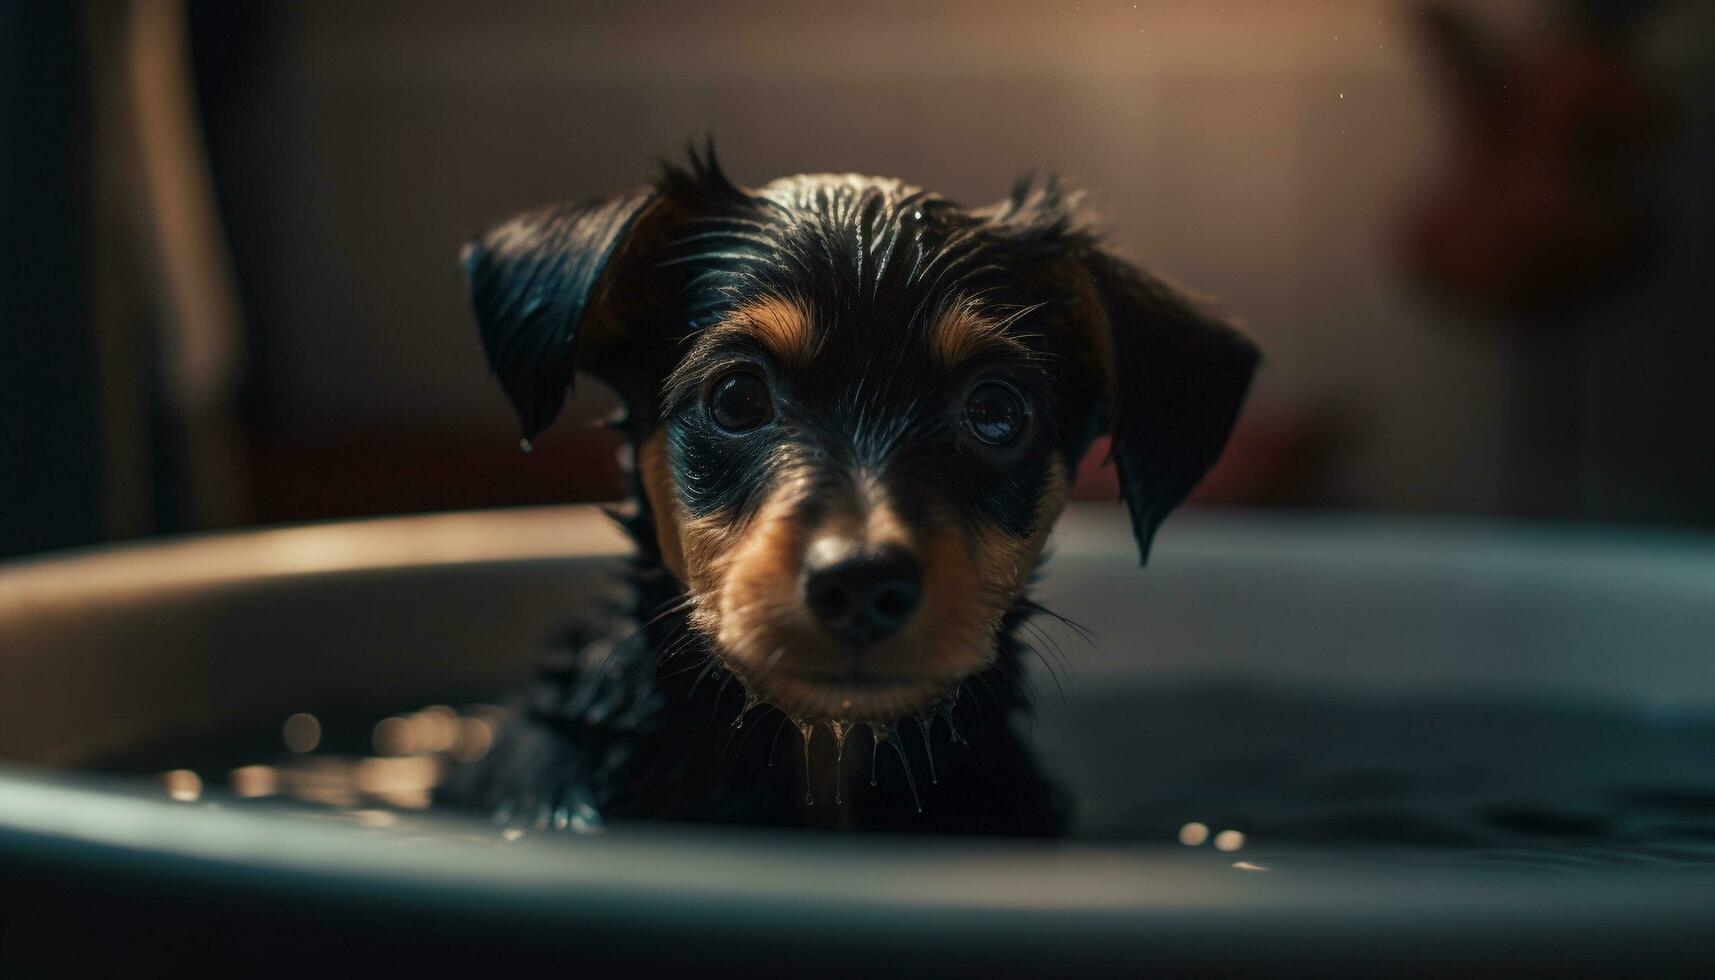 Cute puppy sitting in bathtub, wet fur, looking at camera generated by AI photo